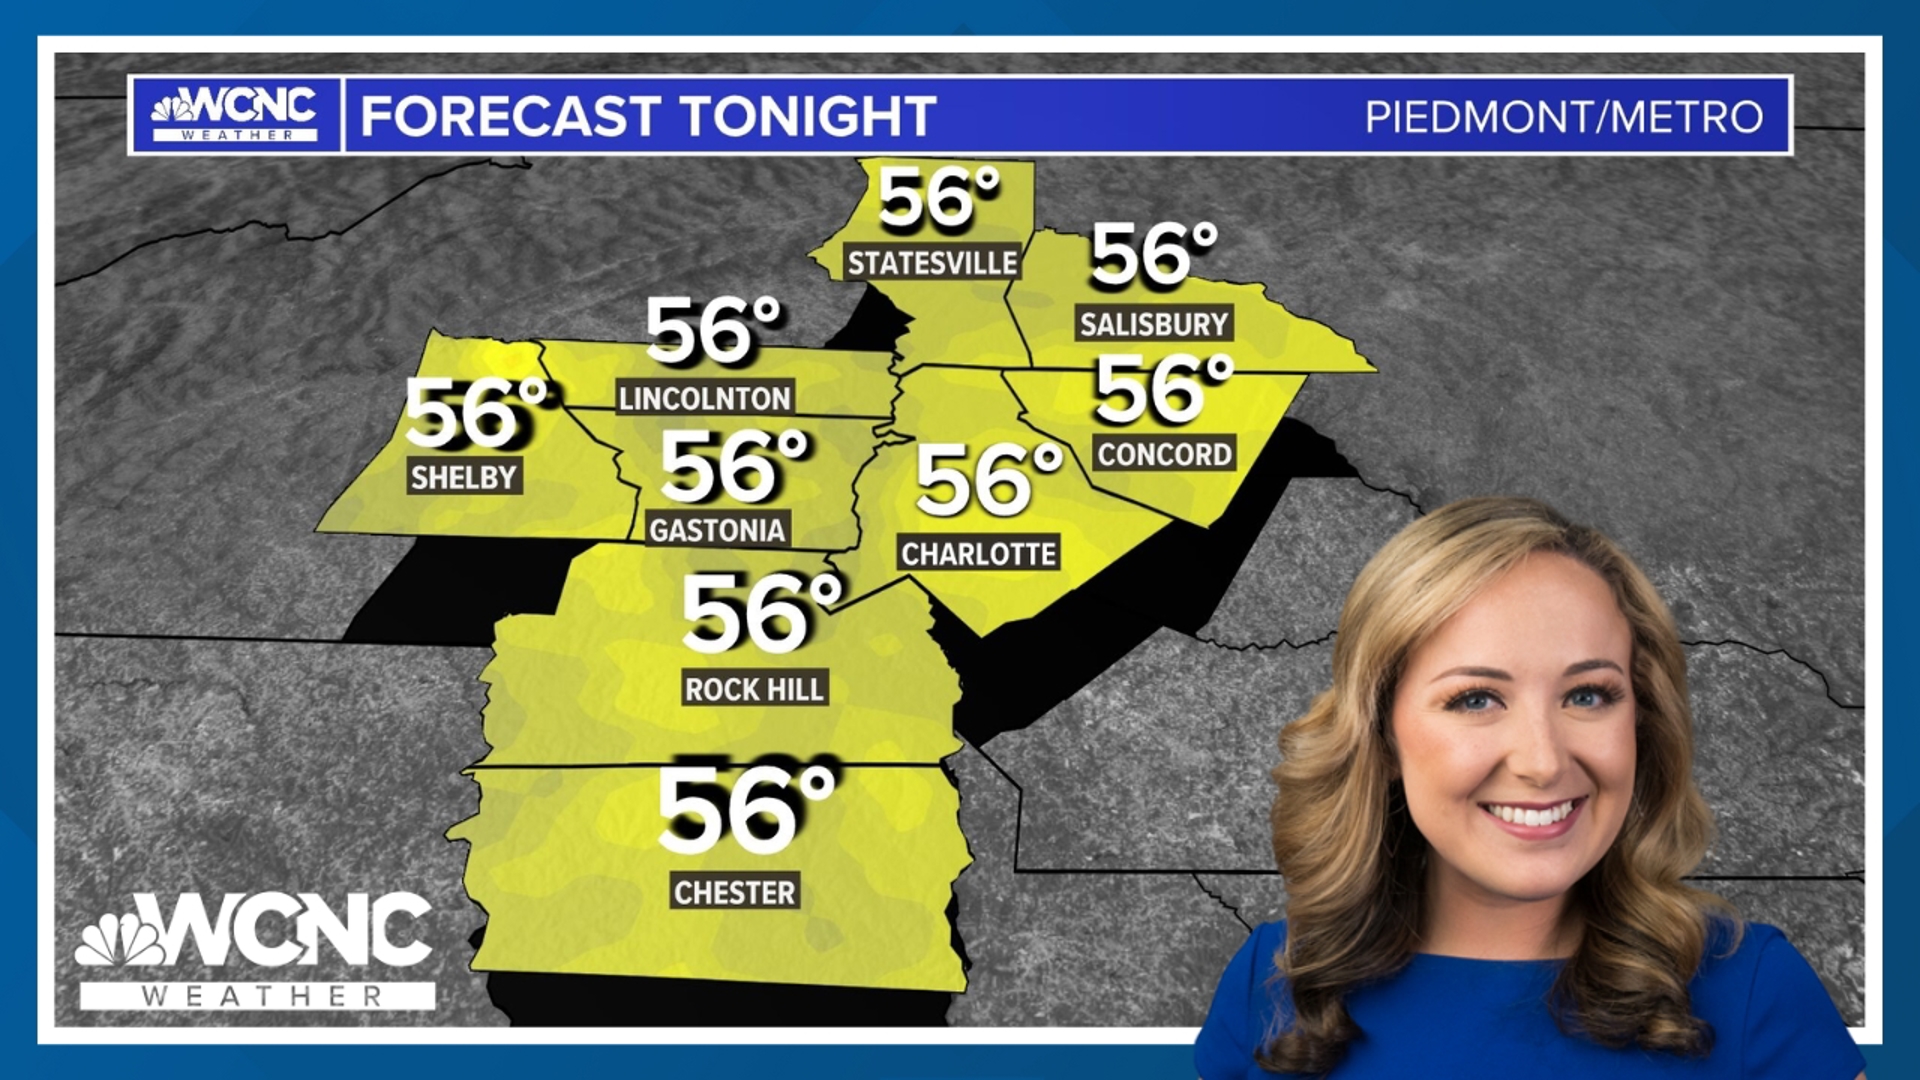 Wednesday night will be mostly clear, with overnight lows in the 50s and 60s.